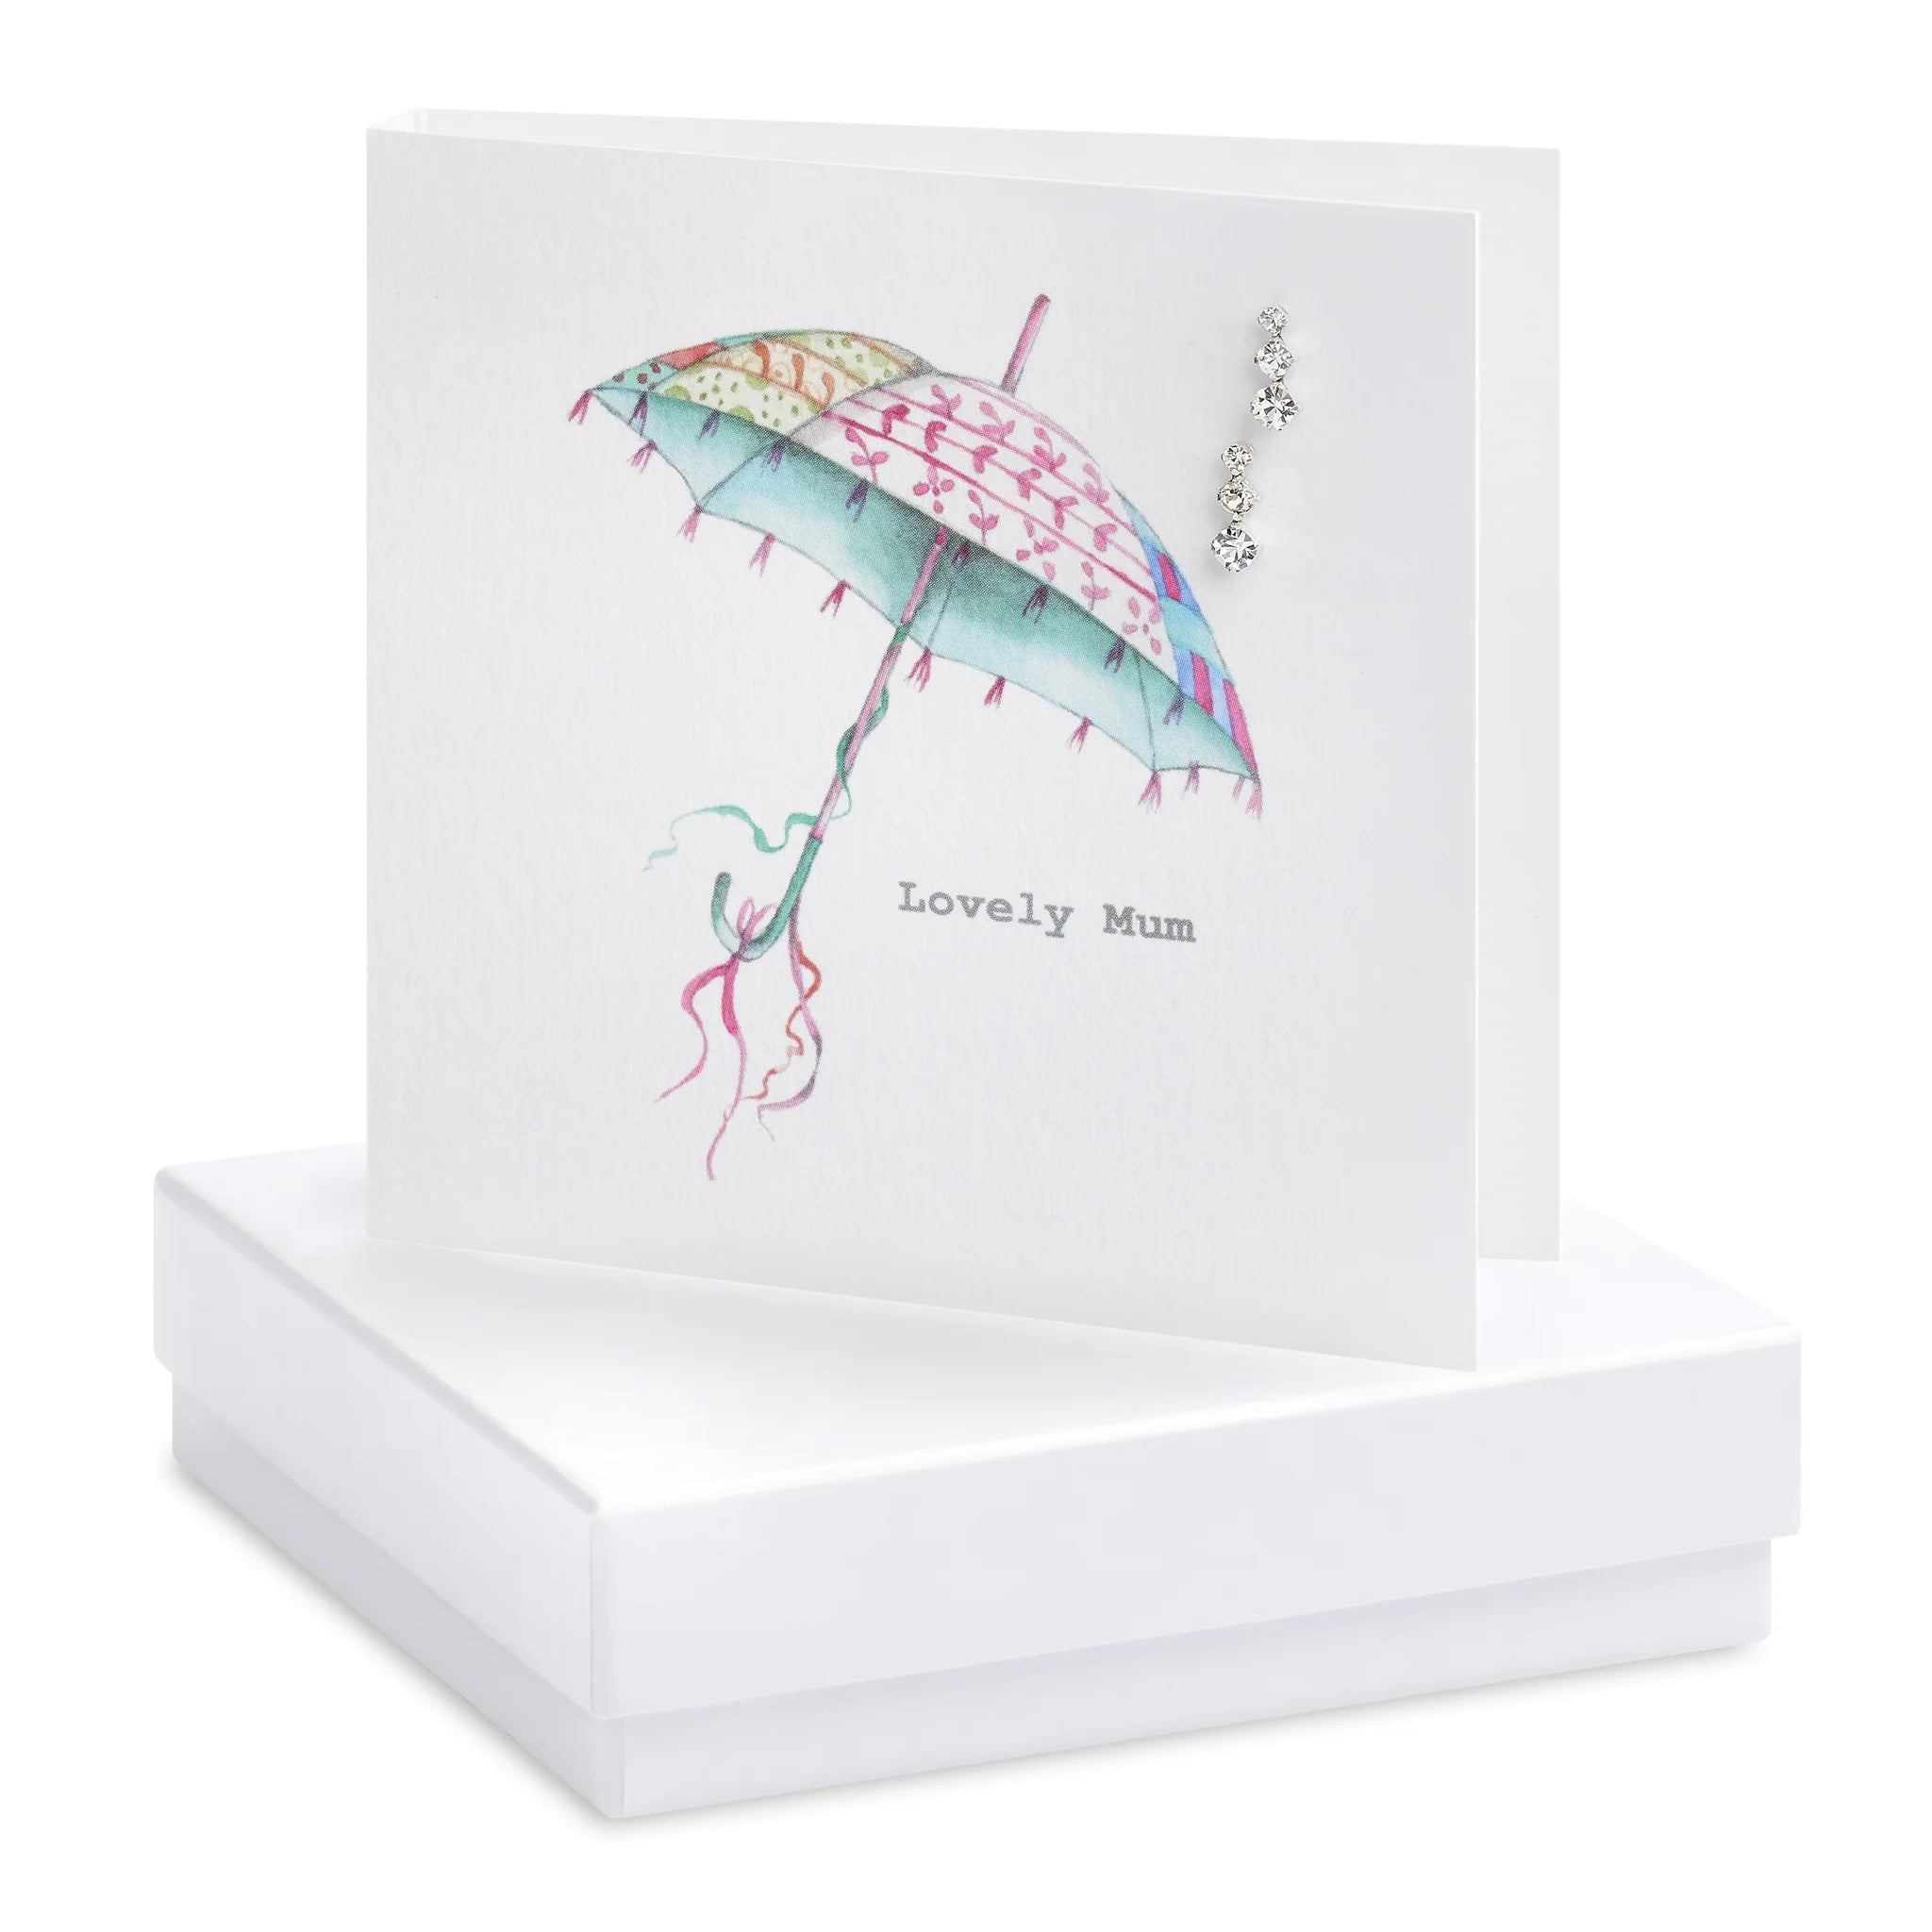 Crumble & Core |  Lovely Mum with Umbrella Card with Earrings in a White Box by Weirs of Baggot Street